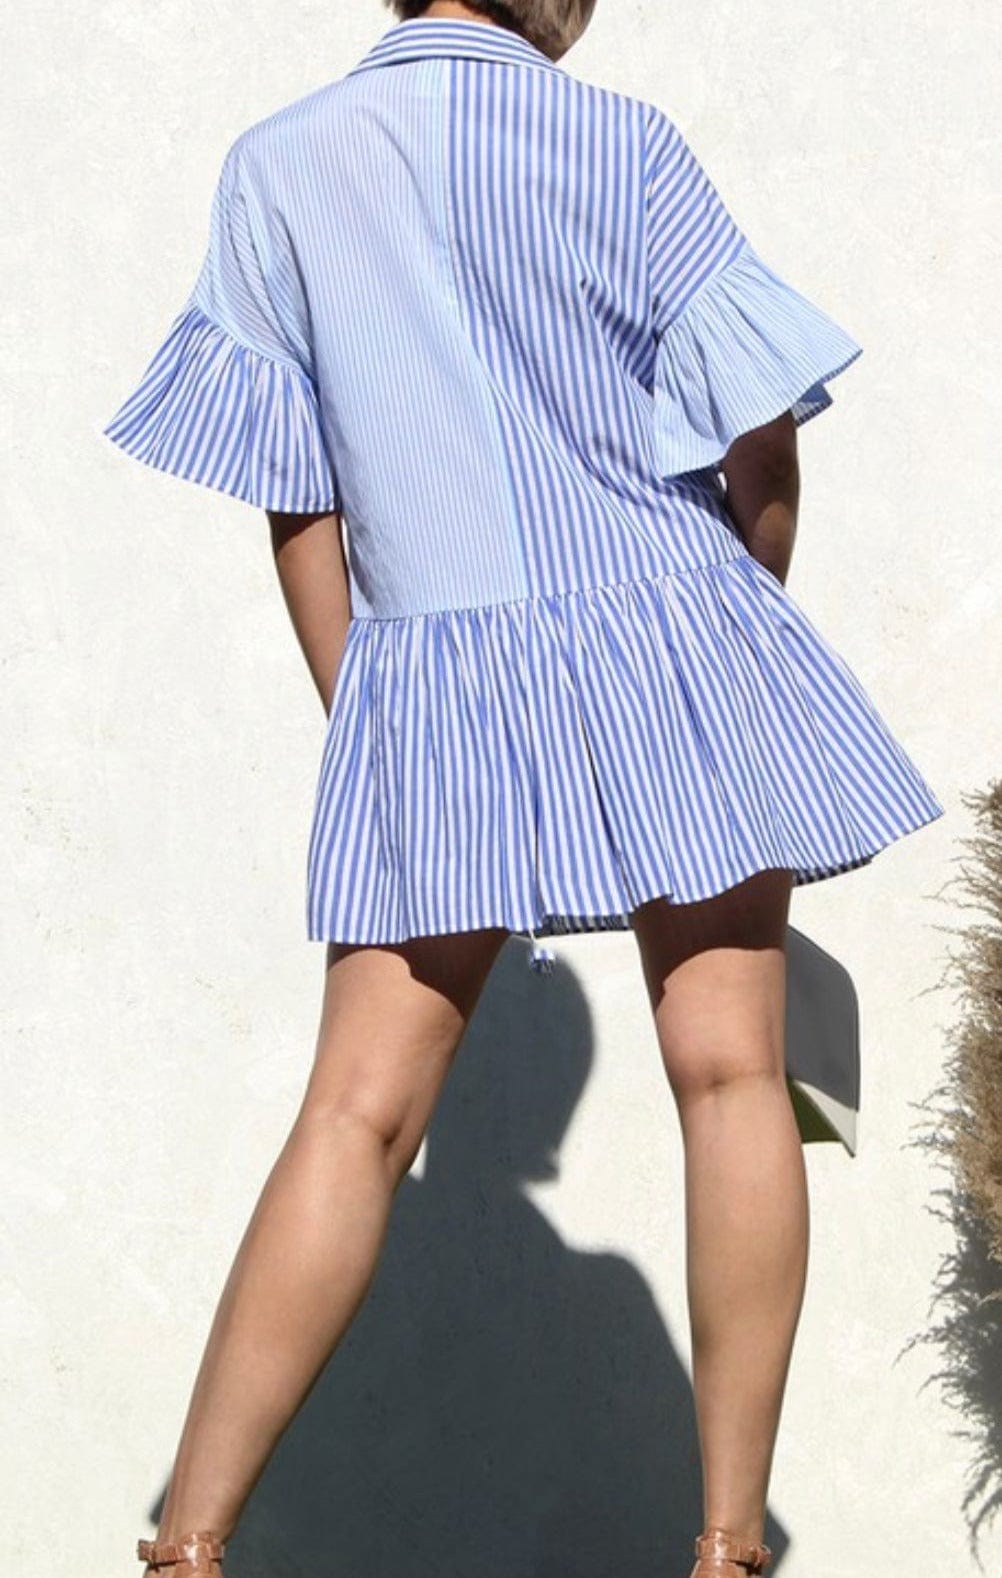 "Blue Crush: A Denim and Blue Stripe Dress for a Sassy and Chic Look"